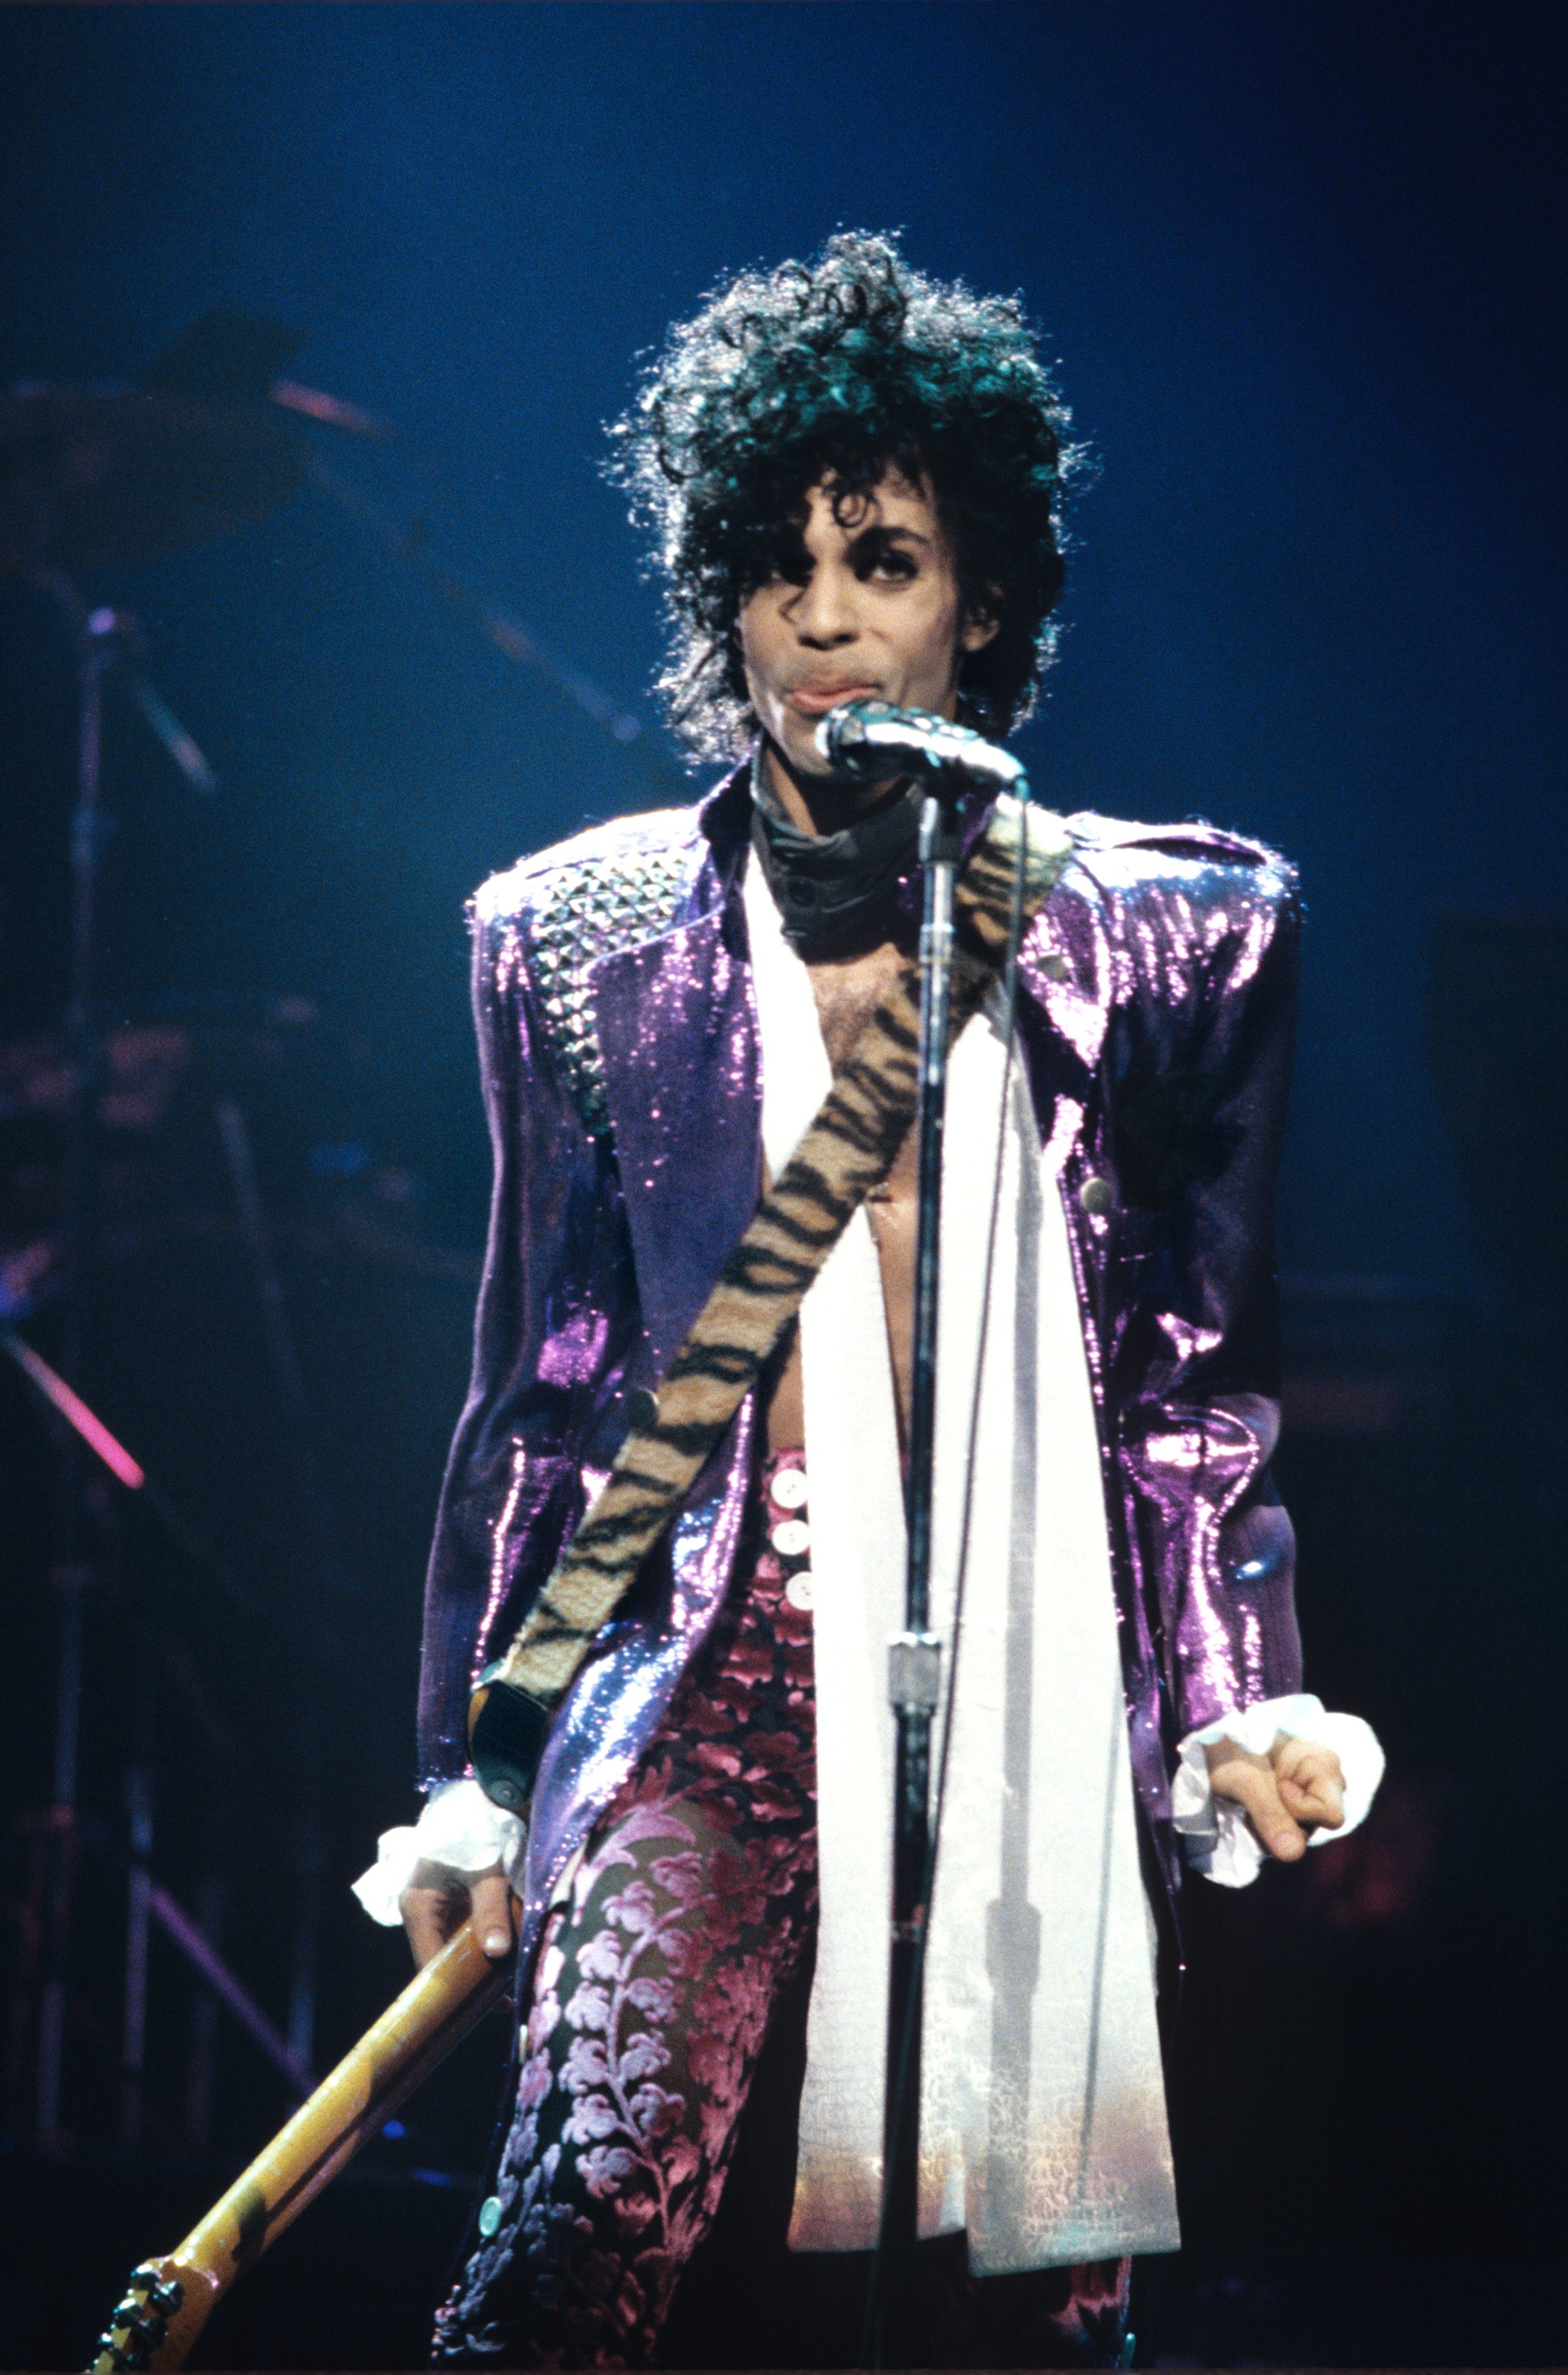 UNITED STATES - NOVEMBER 08: Photo of PRINCE; Prince performing on stage - Purple Rain tour (Photo by Ebet Roberts/Redferns)